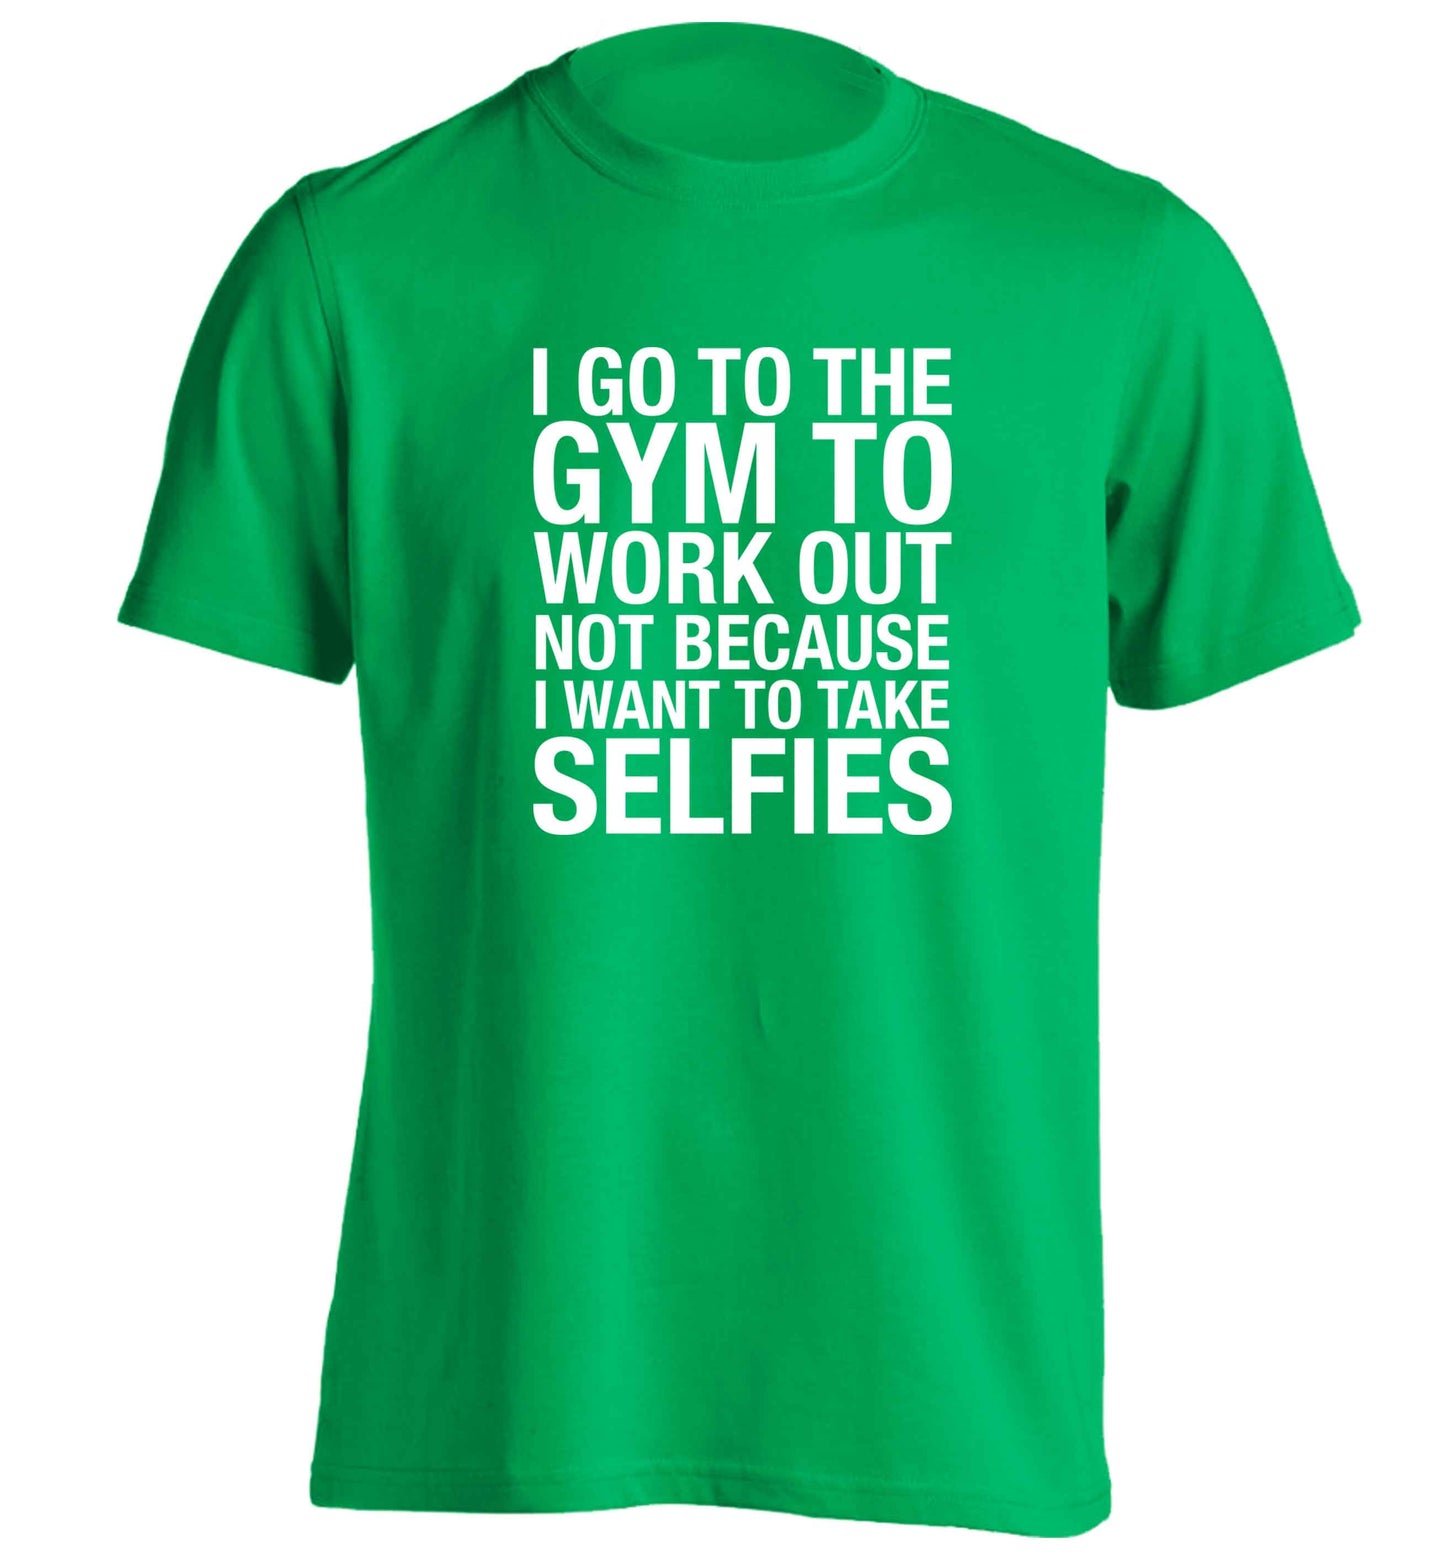 I go to the gym to workout not to take selfies adults unisex green Tshirt 2XL